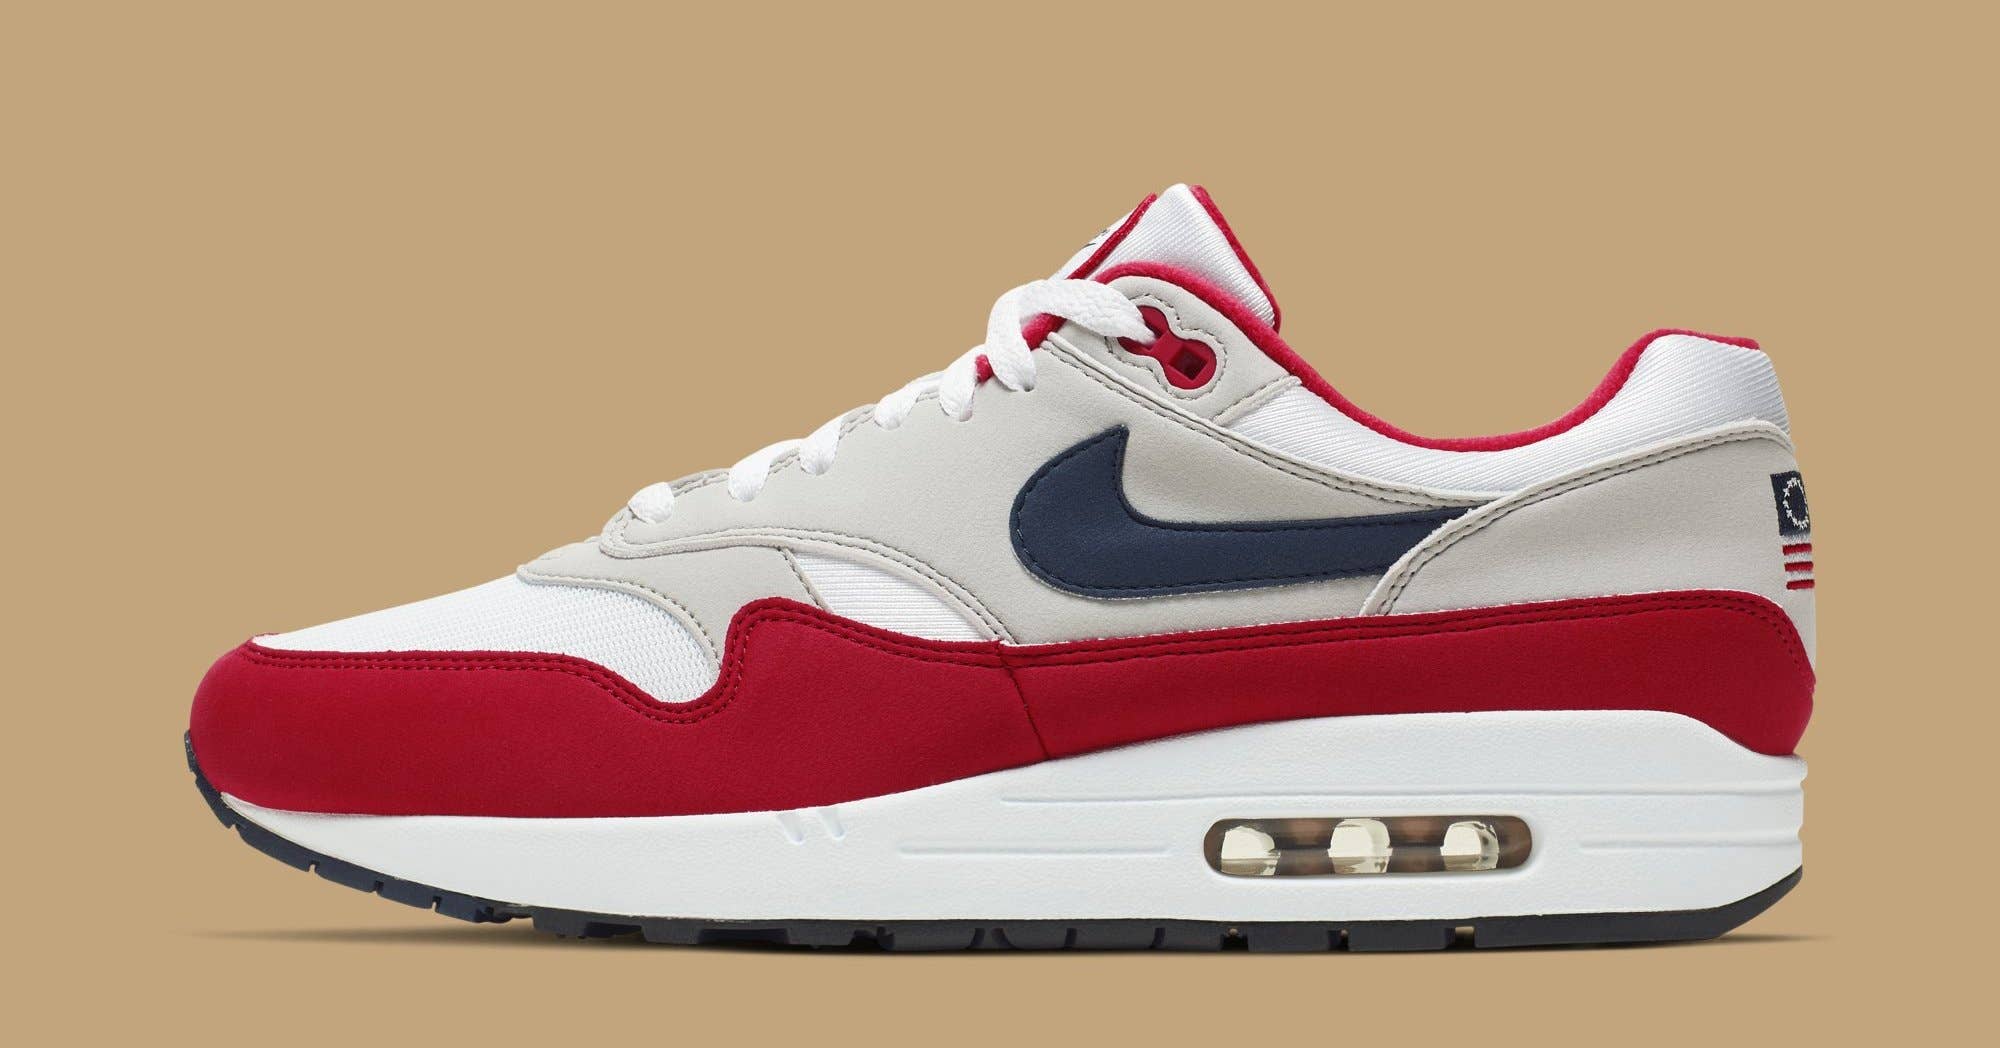 Nike Air Max 1 'Fourth of July' CJ4283 100 (Lateral)